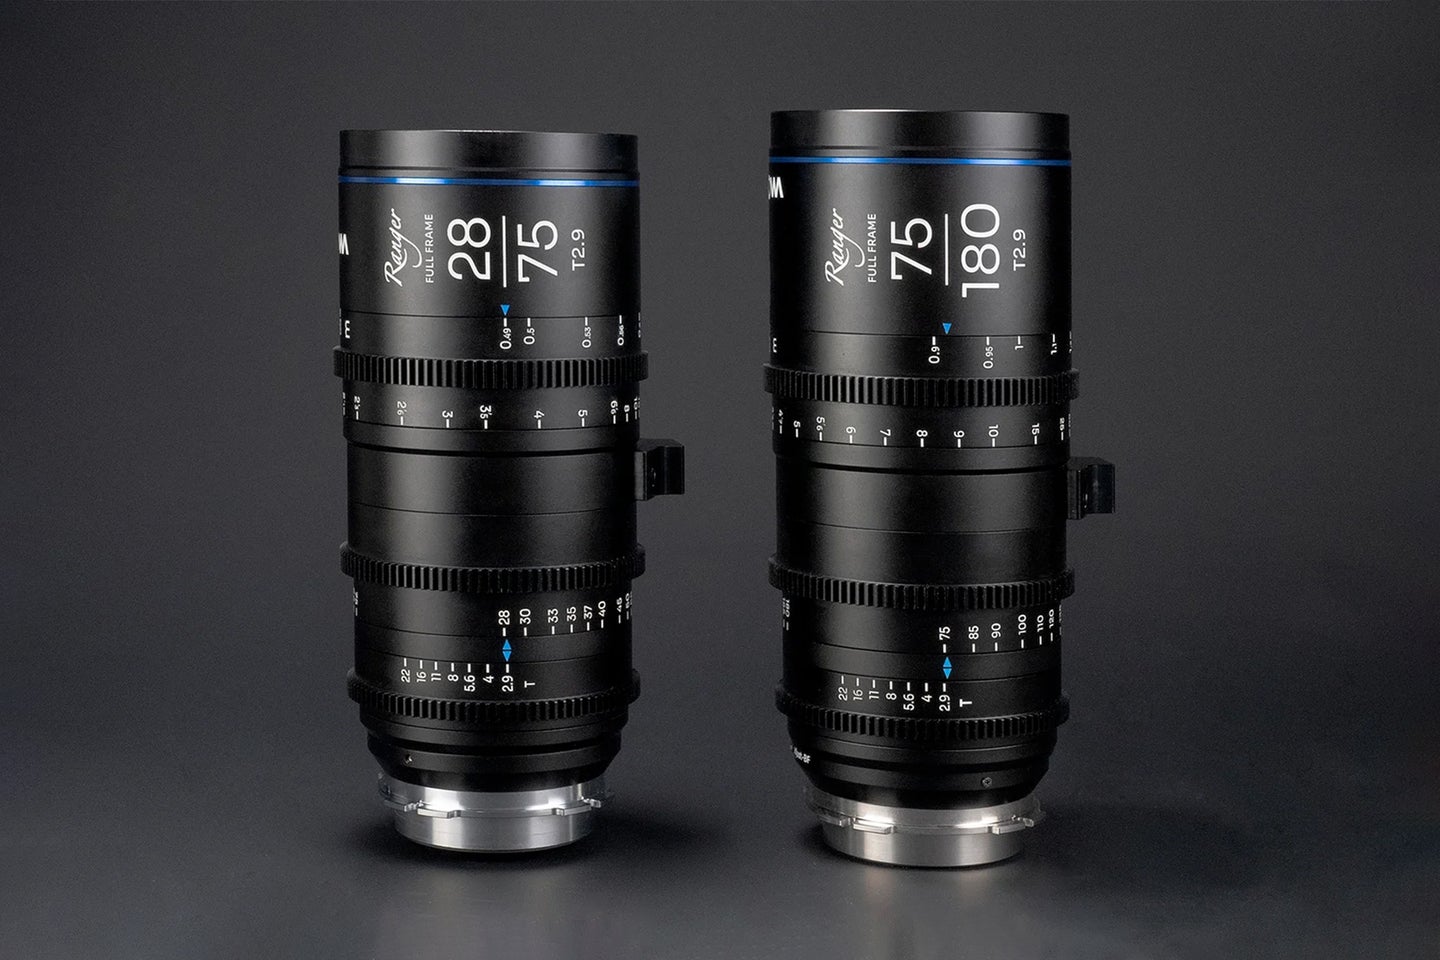 Laowa Ranger 28-75mm and 75-180mm T2.9 cine zoom lenses against a black background